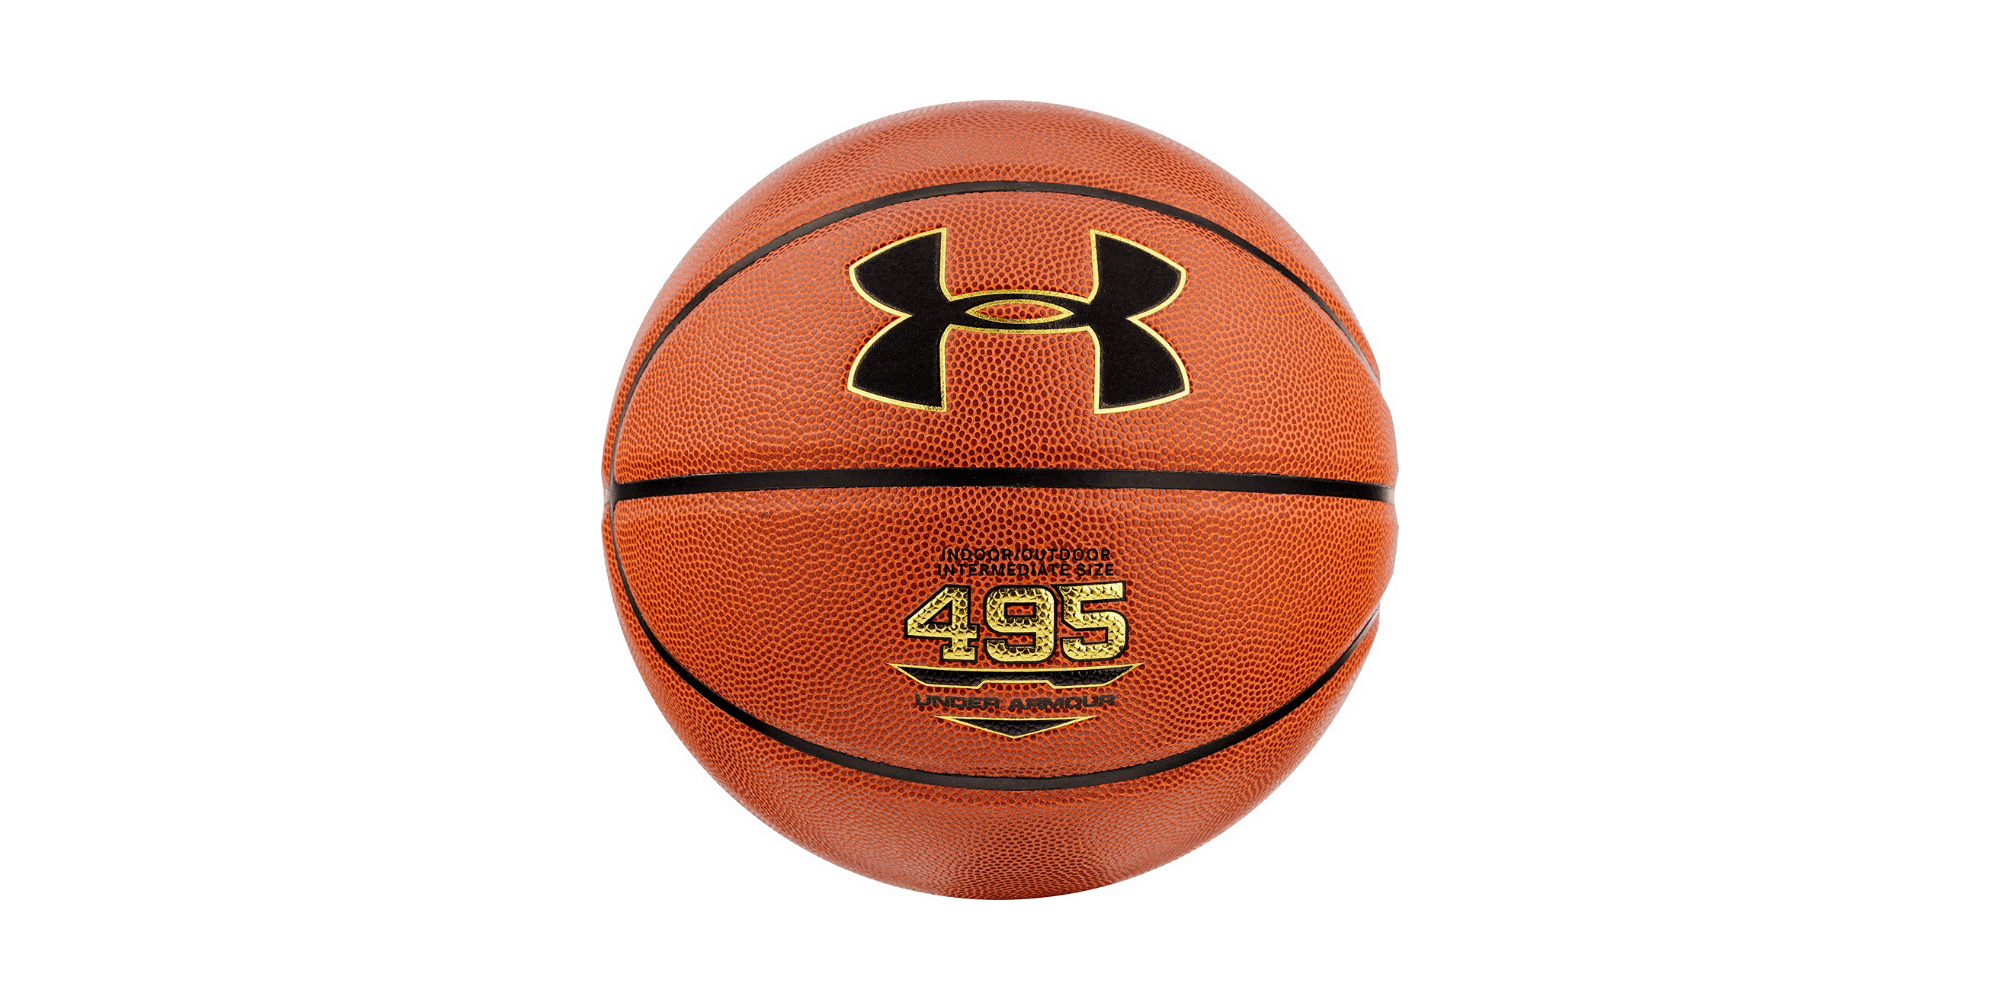 Under Armour 495 Basketball Review